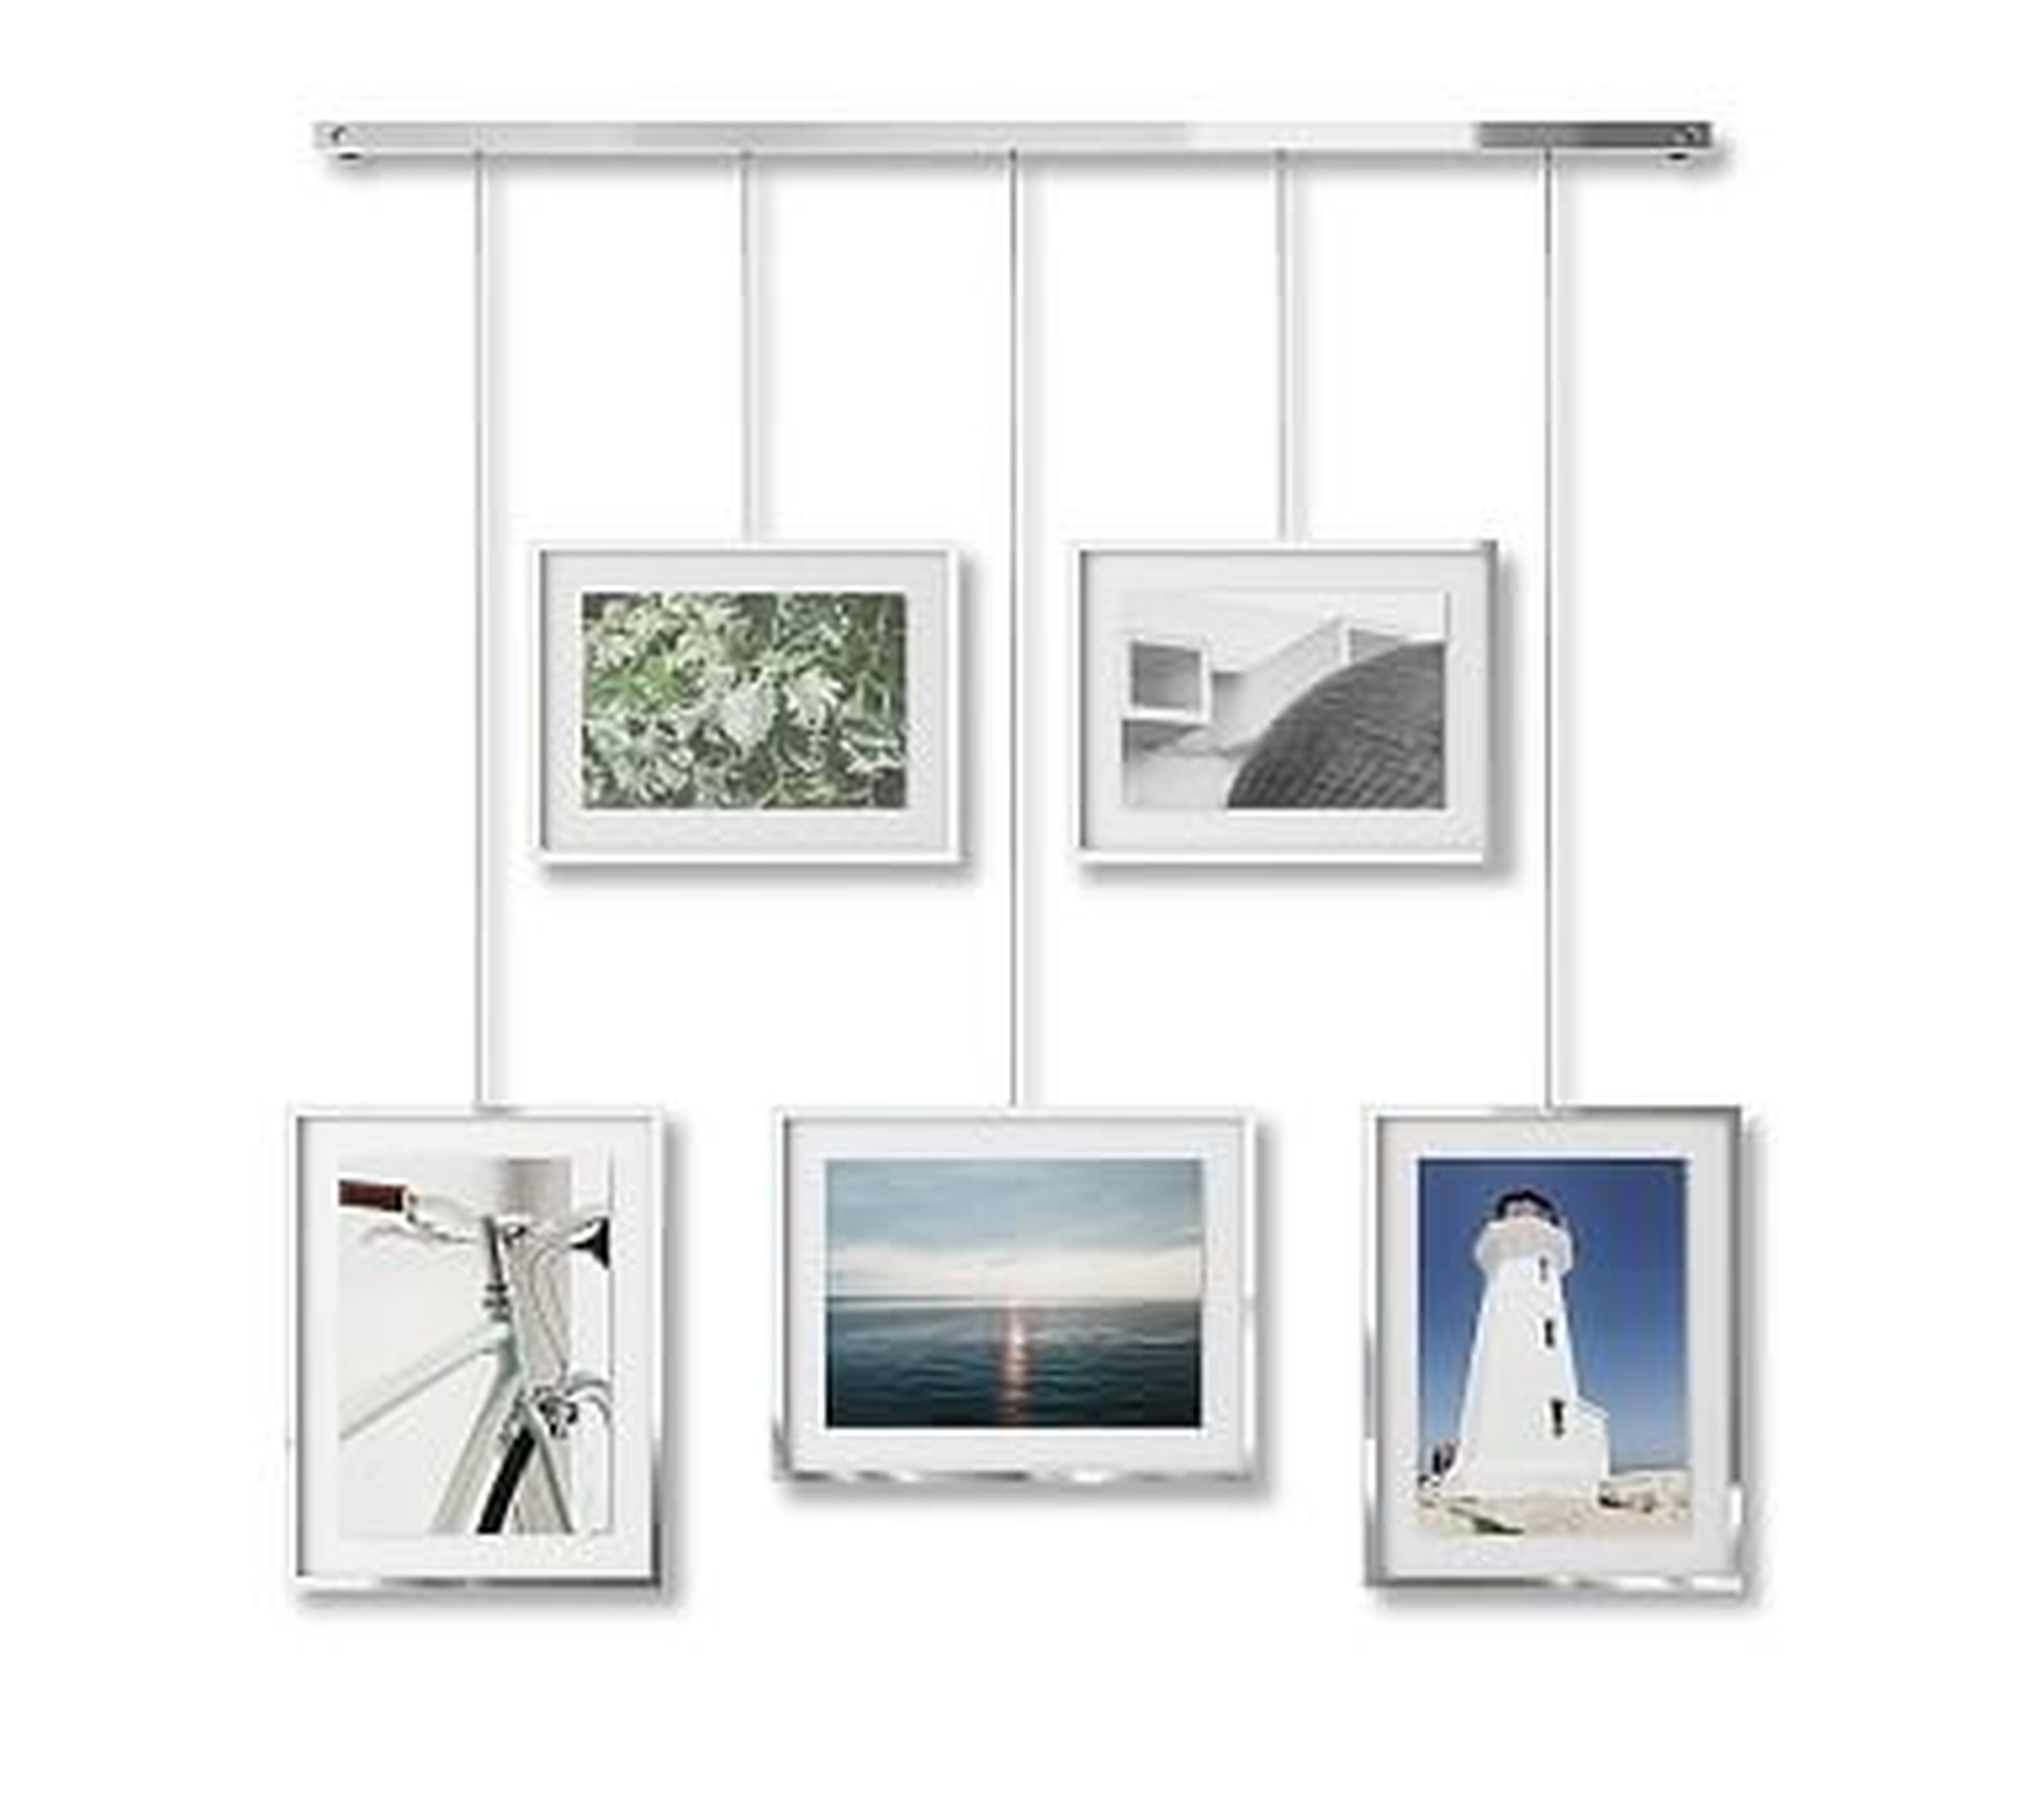 Hanging Chrome Gallery Frames, Set of 5 - Pottery Barn